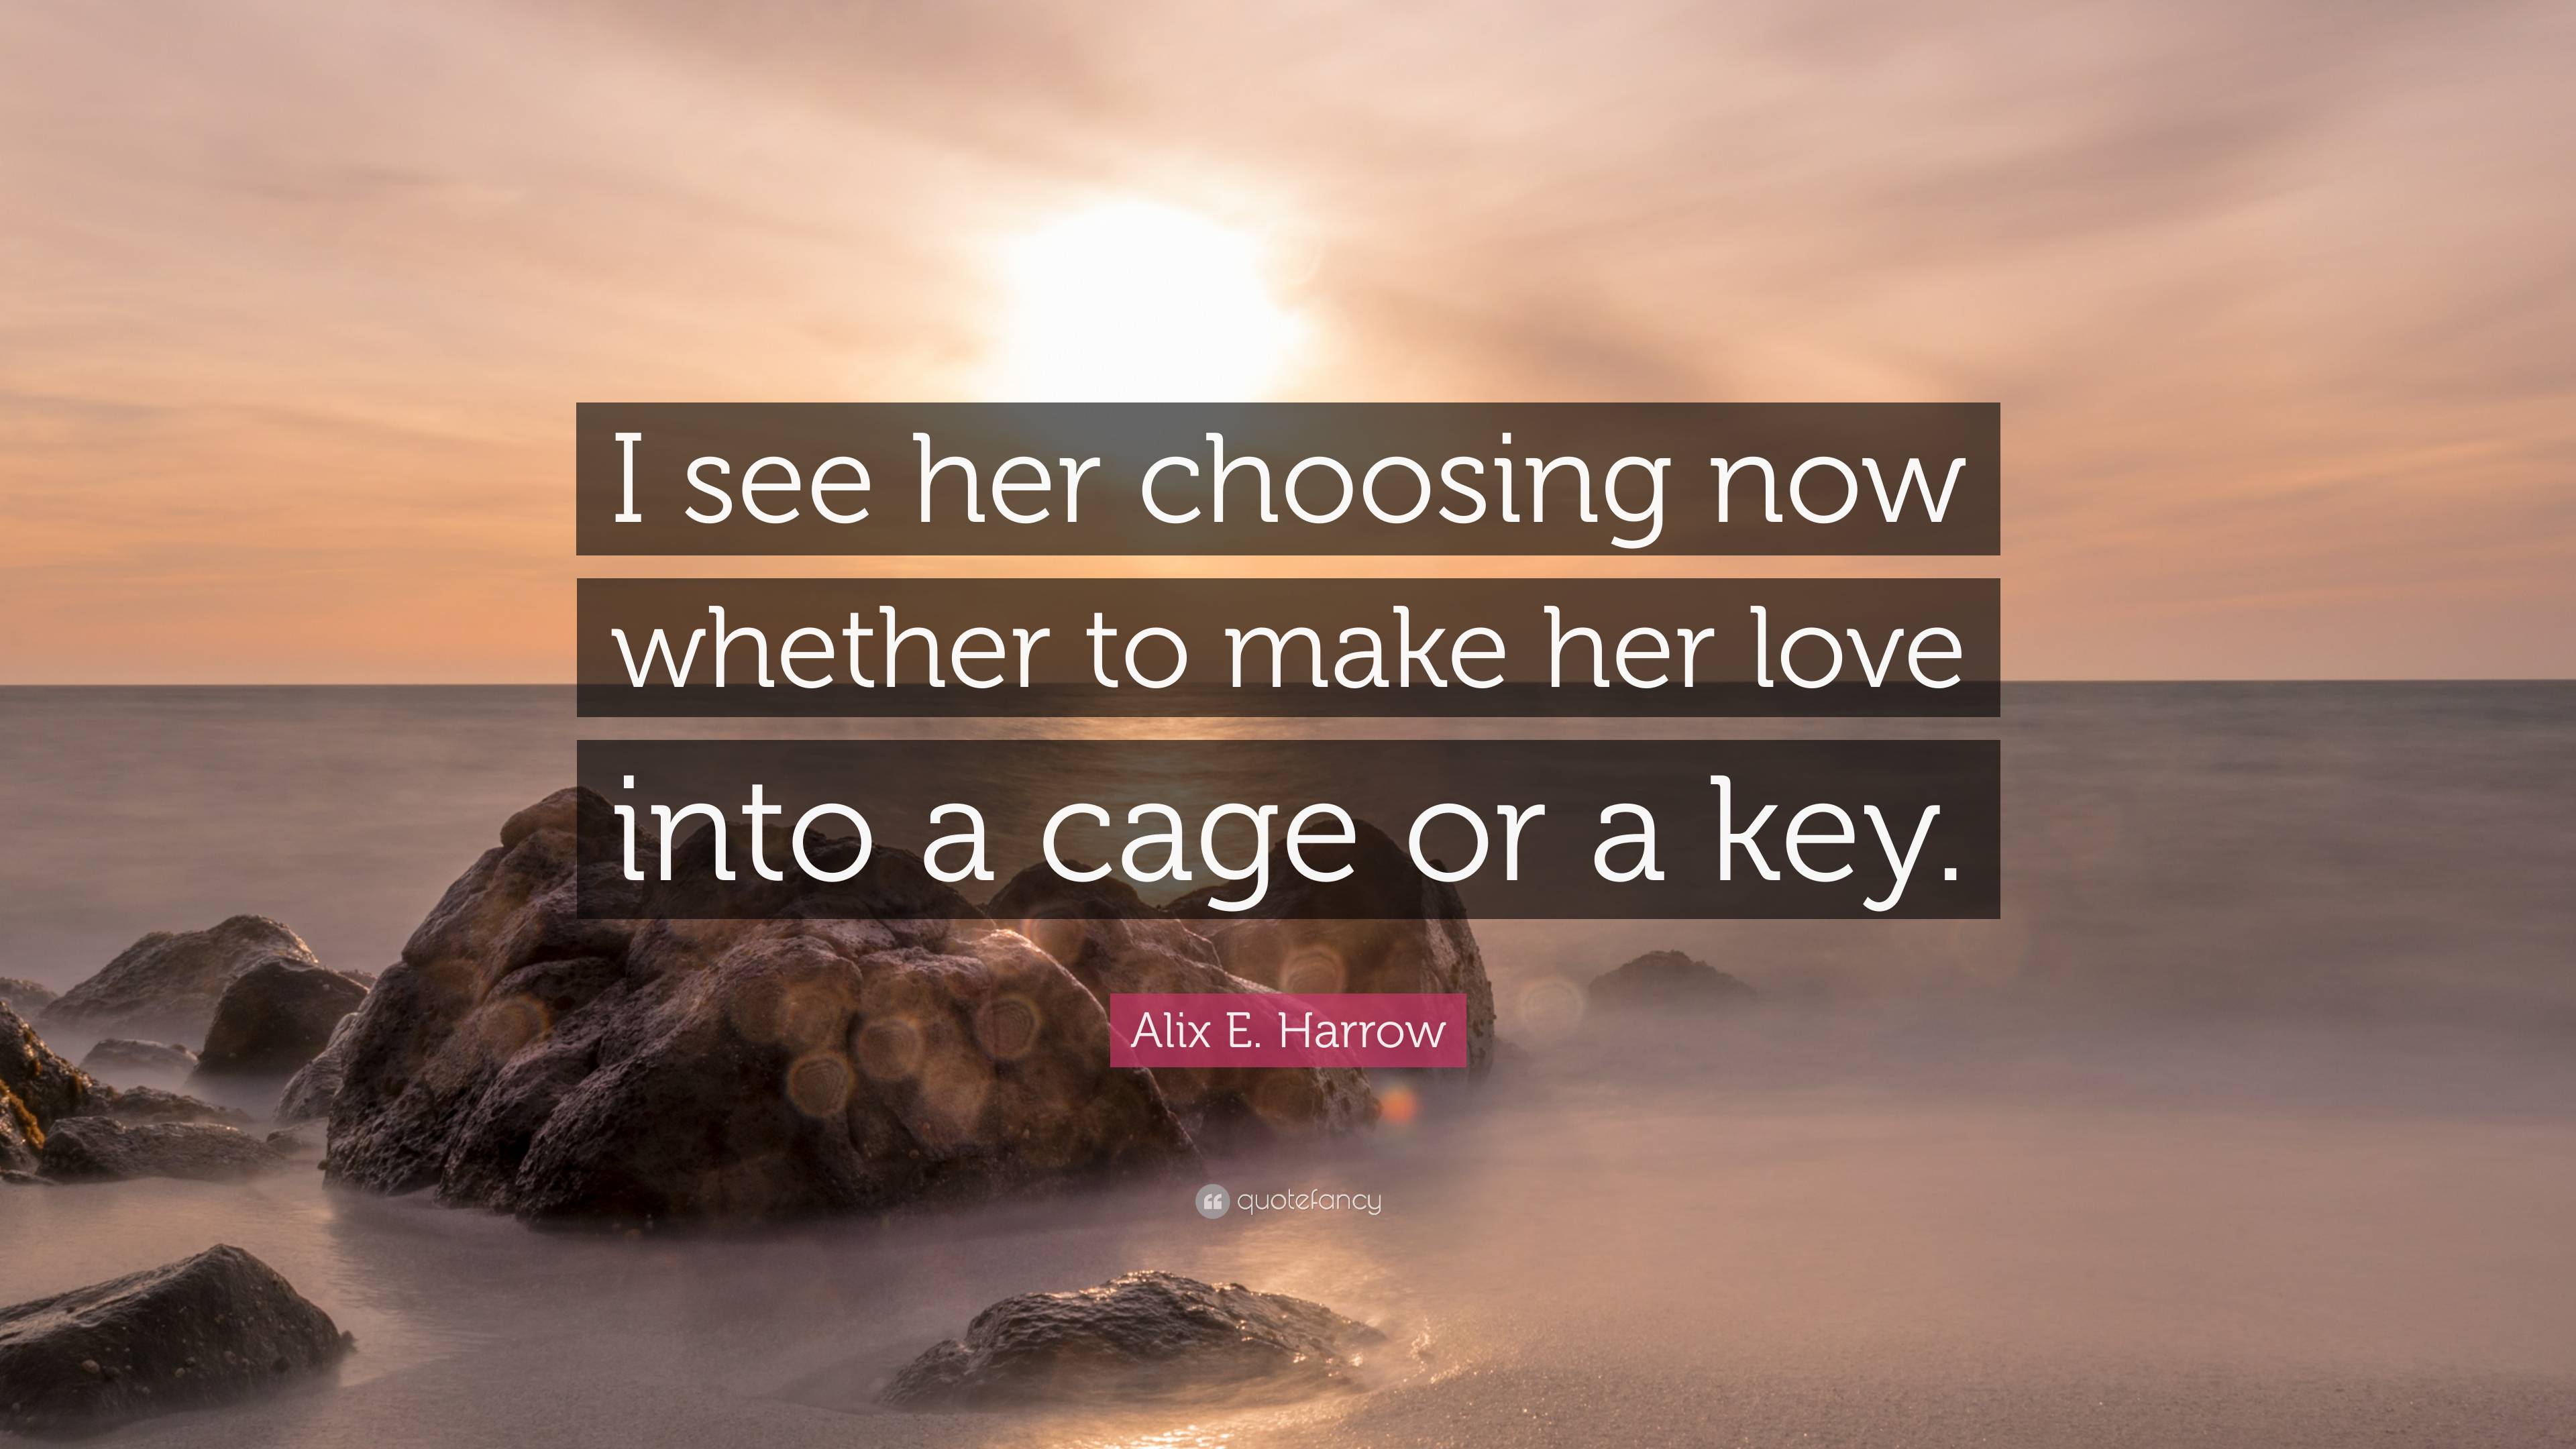 Alix E. Harrow Quote: “I see her choosing now whether to make her love ...